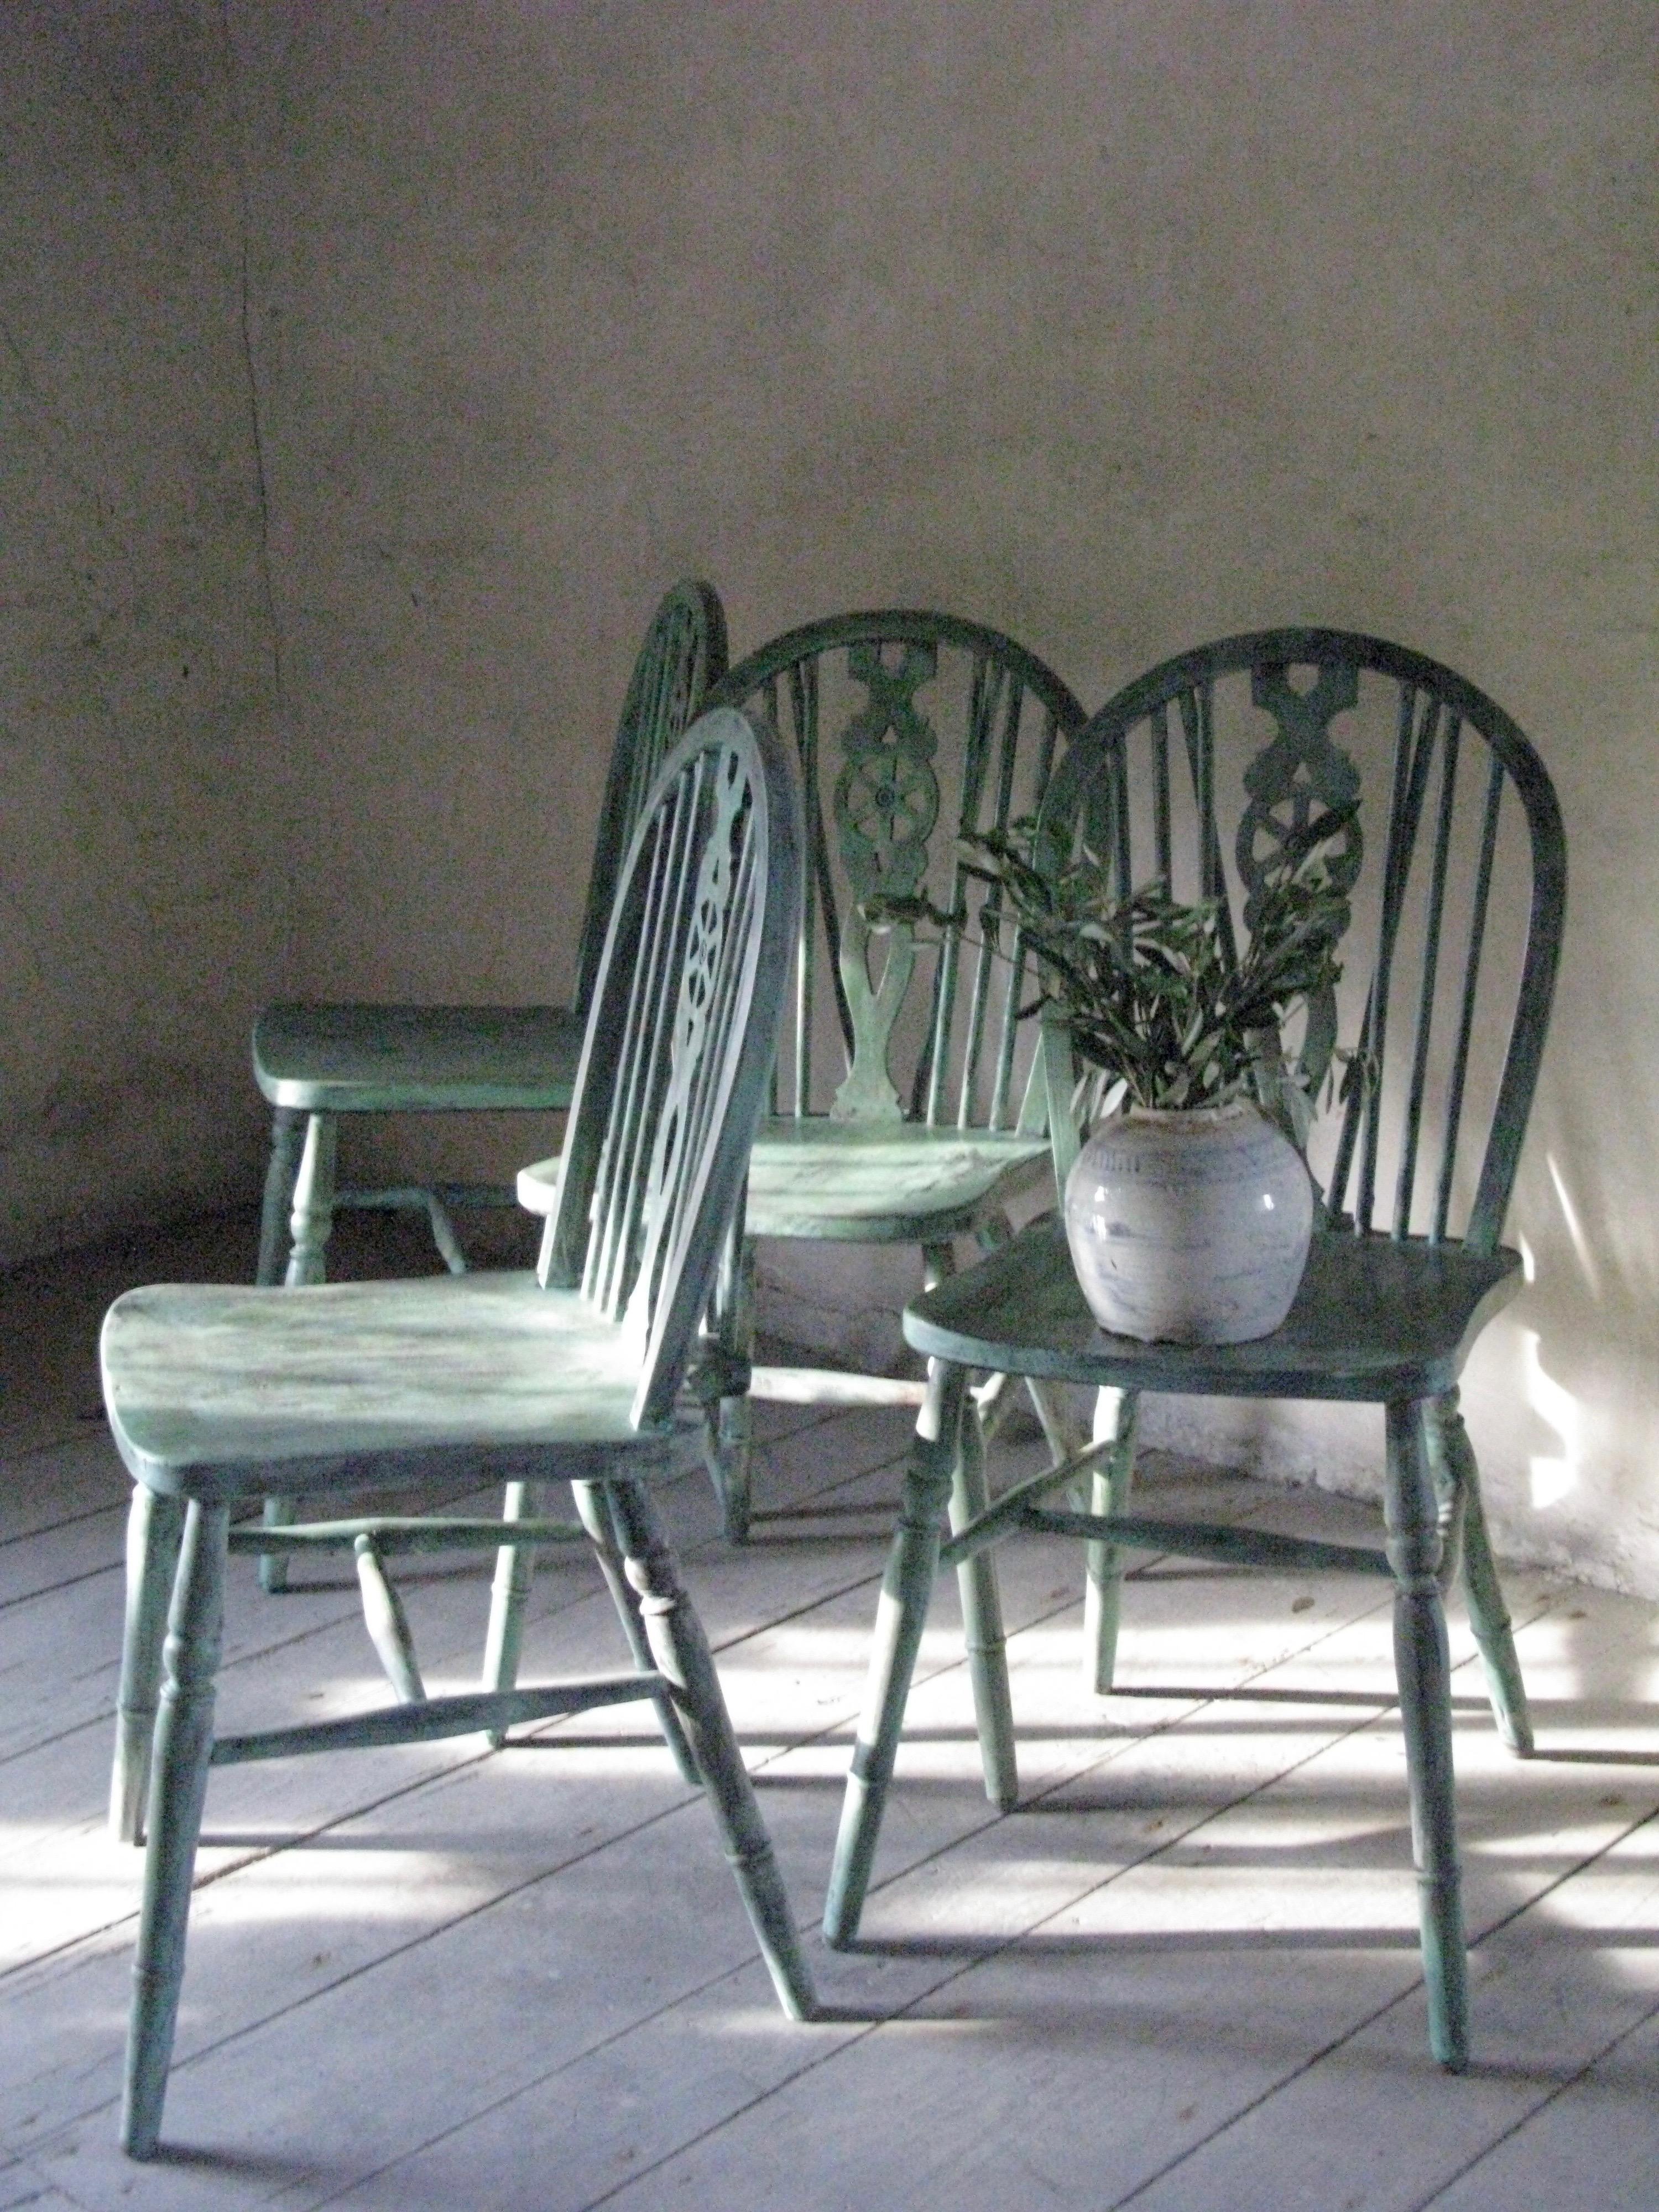 Country Set of 4 Windsor Chairs, English, Antique Windsor Chairs, Decorative, Painted For Sale